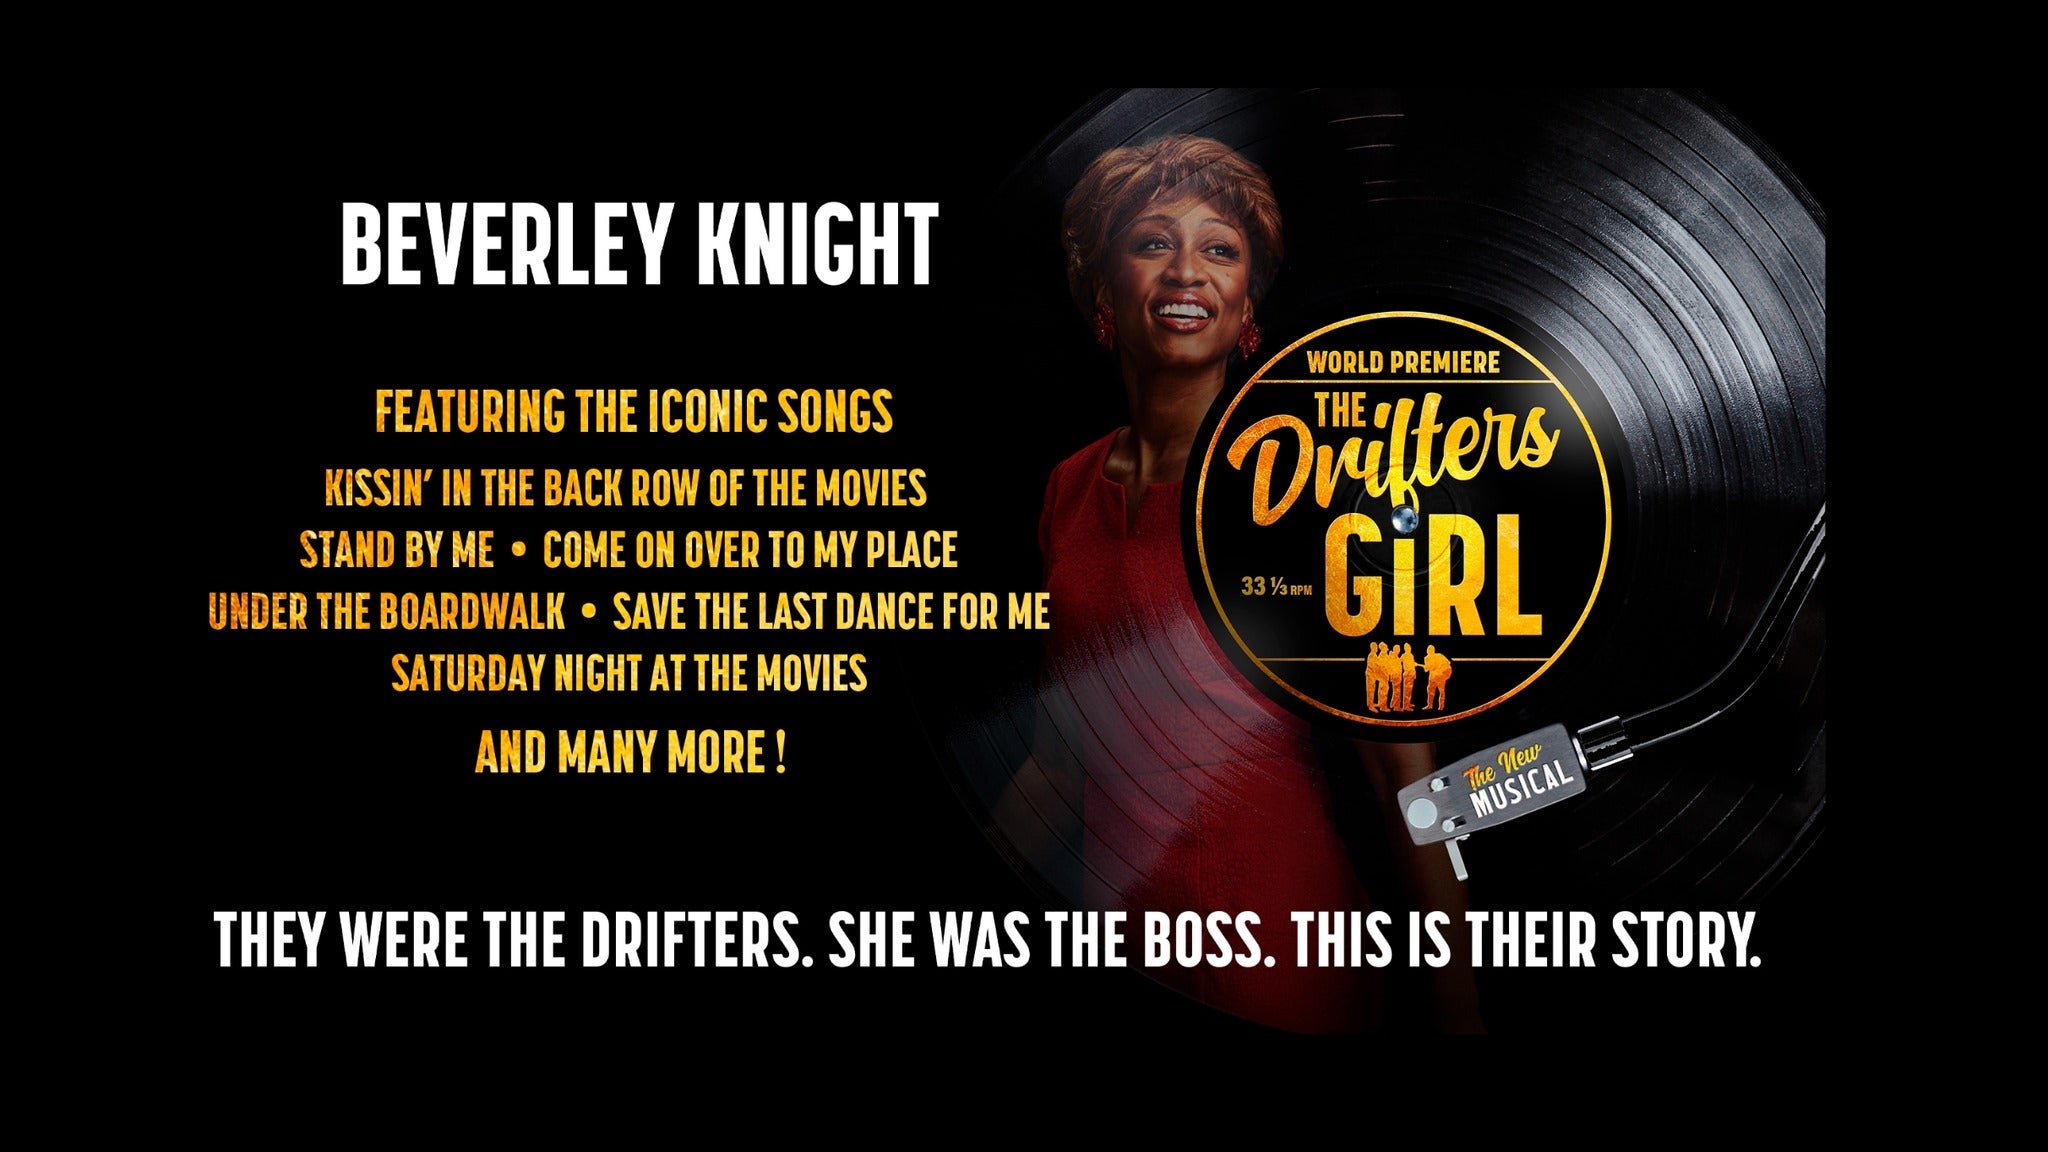 The Drifters Girl Event Title Pic